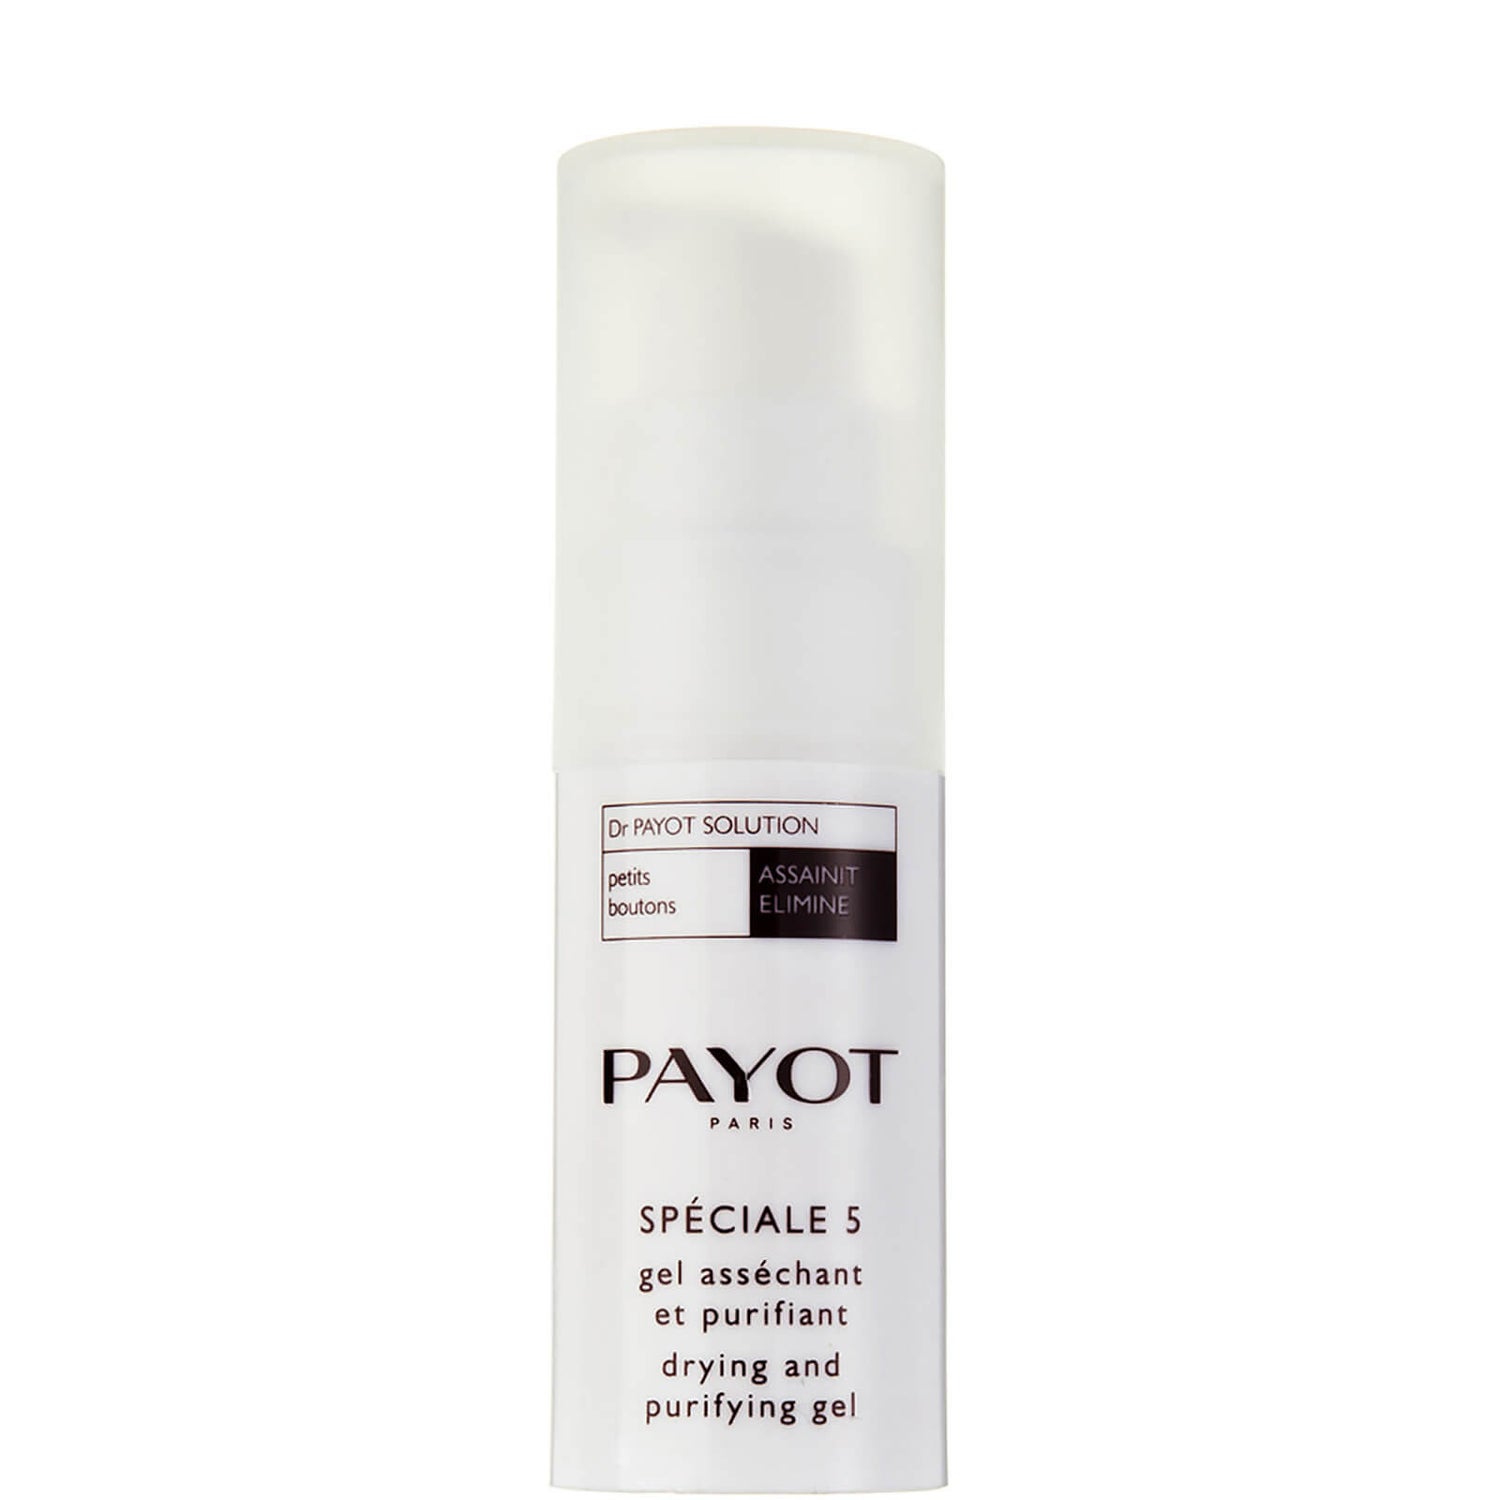 Payot Paris Speciale 5 - Blemish Drying & Purifying Gel